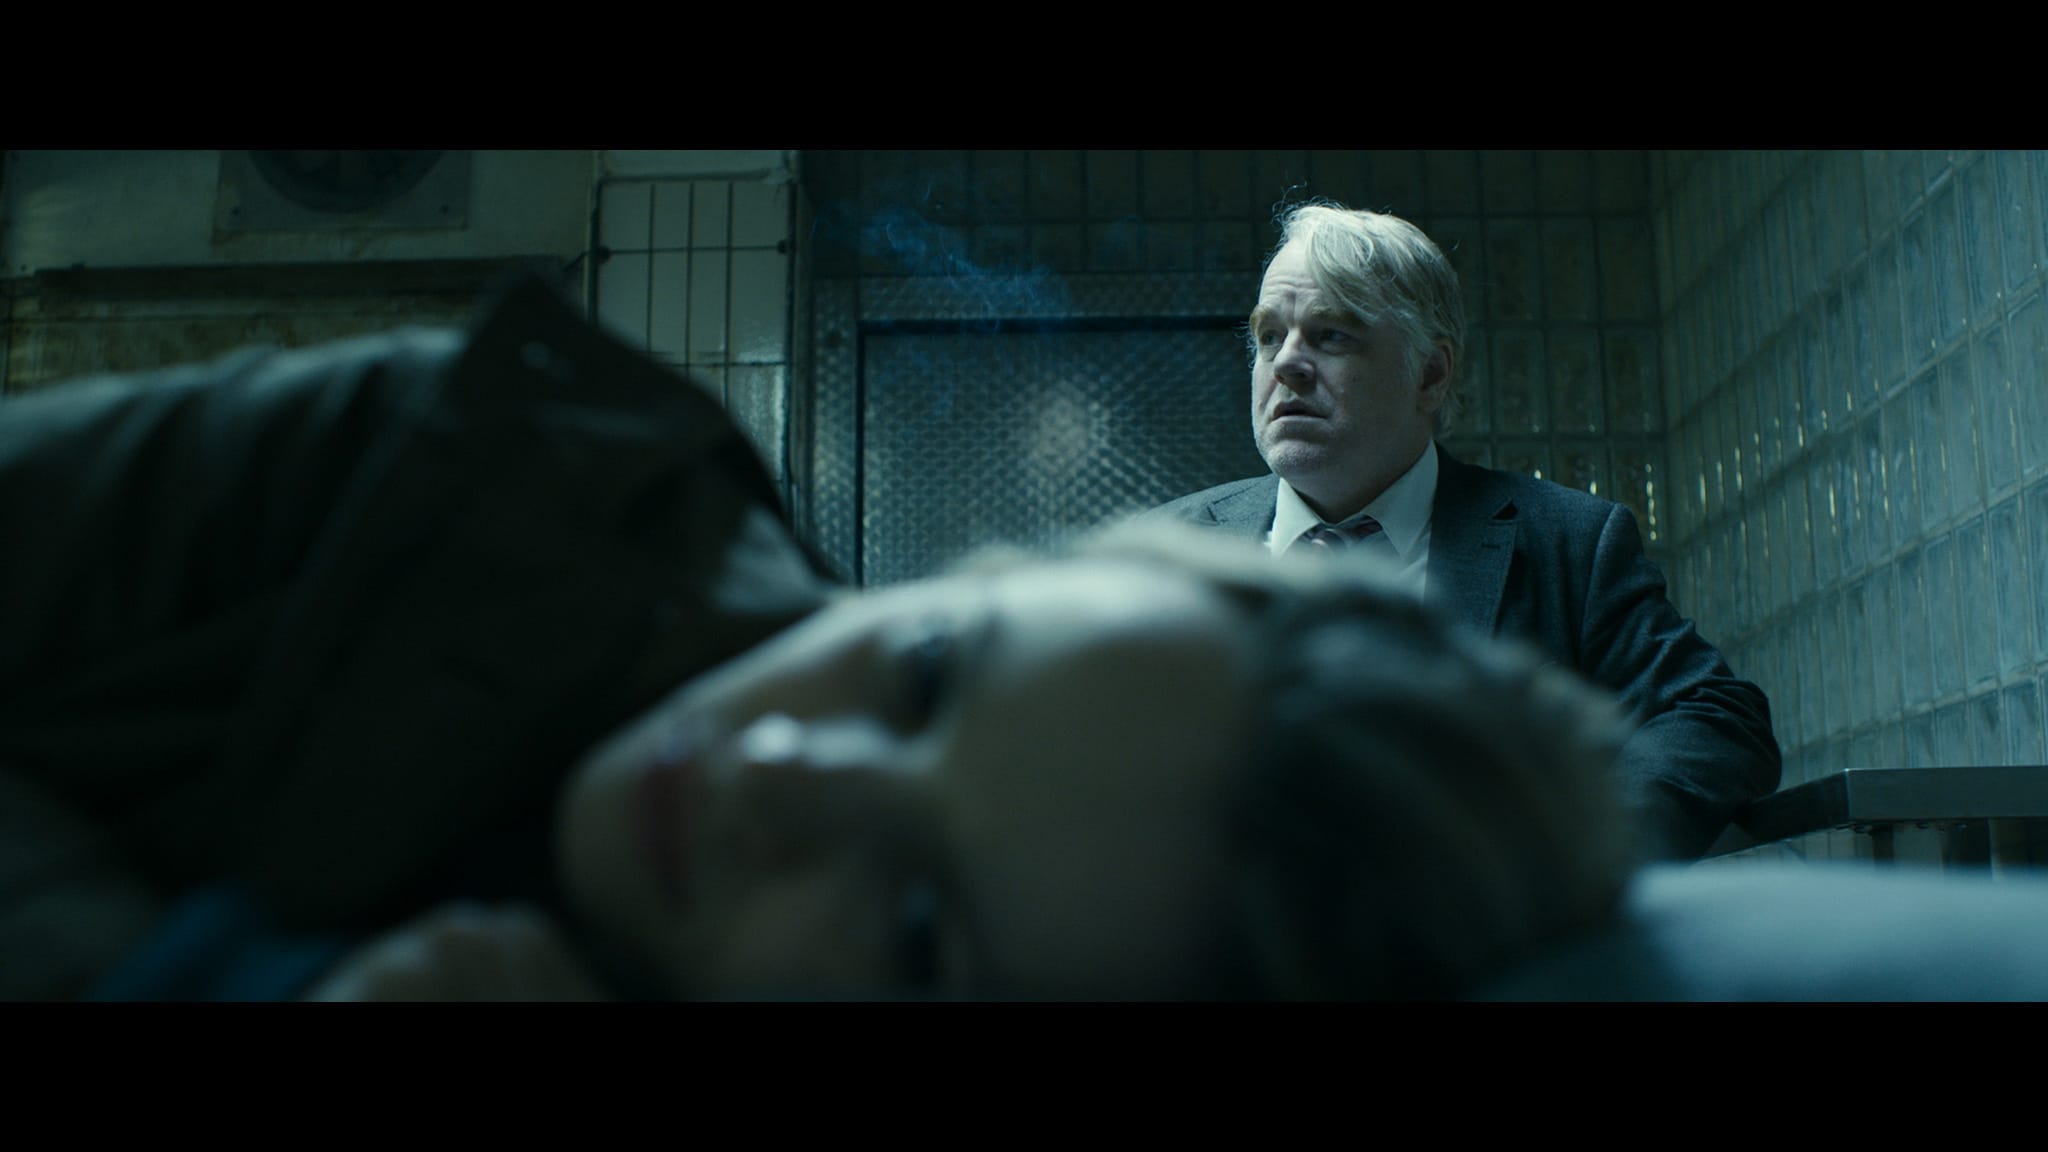 Philip Seymour Hoffman and Rachel McAdams star in a scene from the film &quot;A Most Wanted Man,&quot; which premiered at the 2014 Sundance Film Festival.